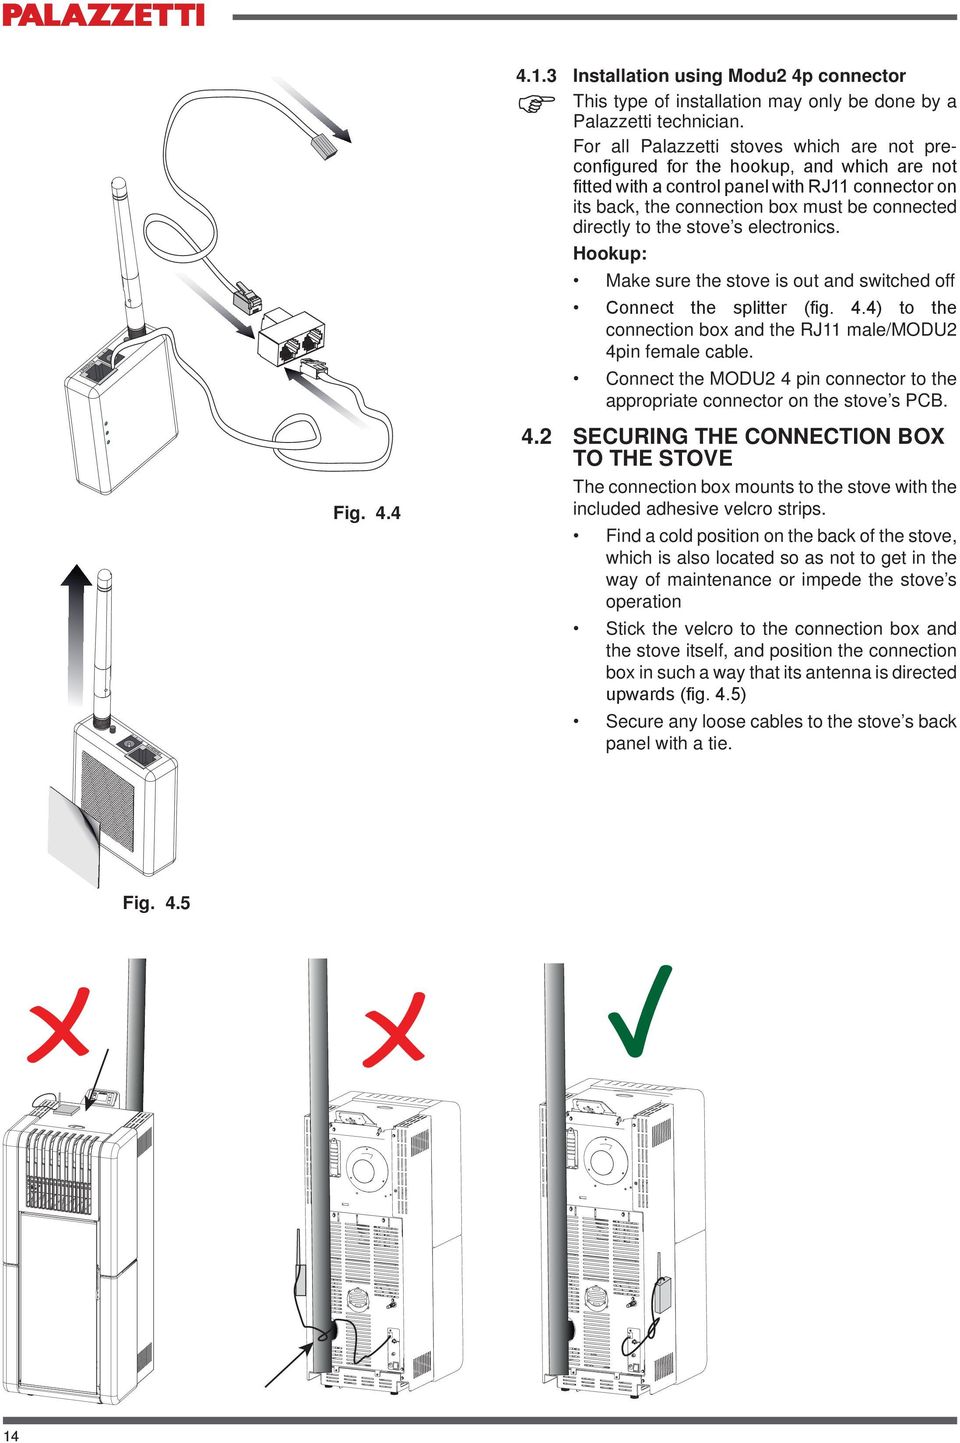 Hookup: Make sure the stove is out and switched off connection box and the RJ11 male/modu2 4pin female cable. Connect the MODU2 4 pin connector to the appropriate connector on the stove s PCB. Fig. 4.4 4.